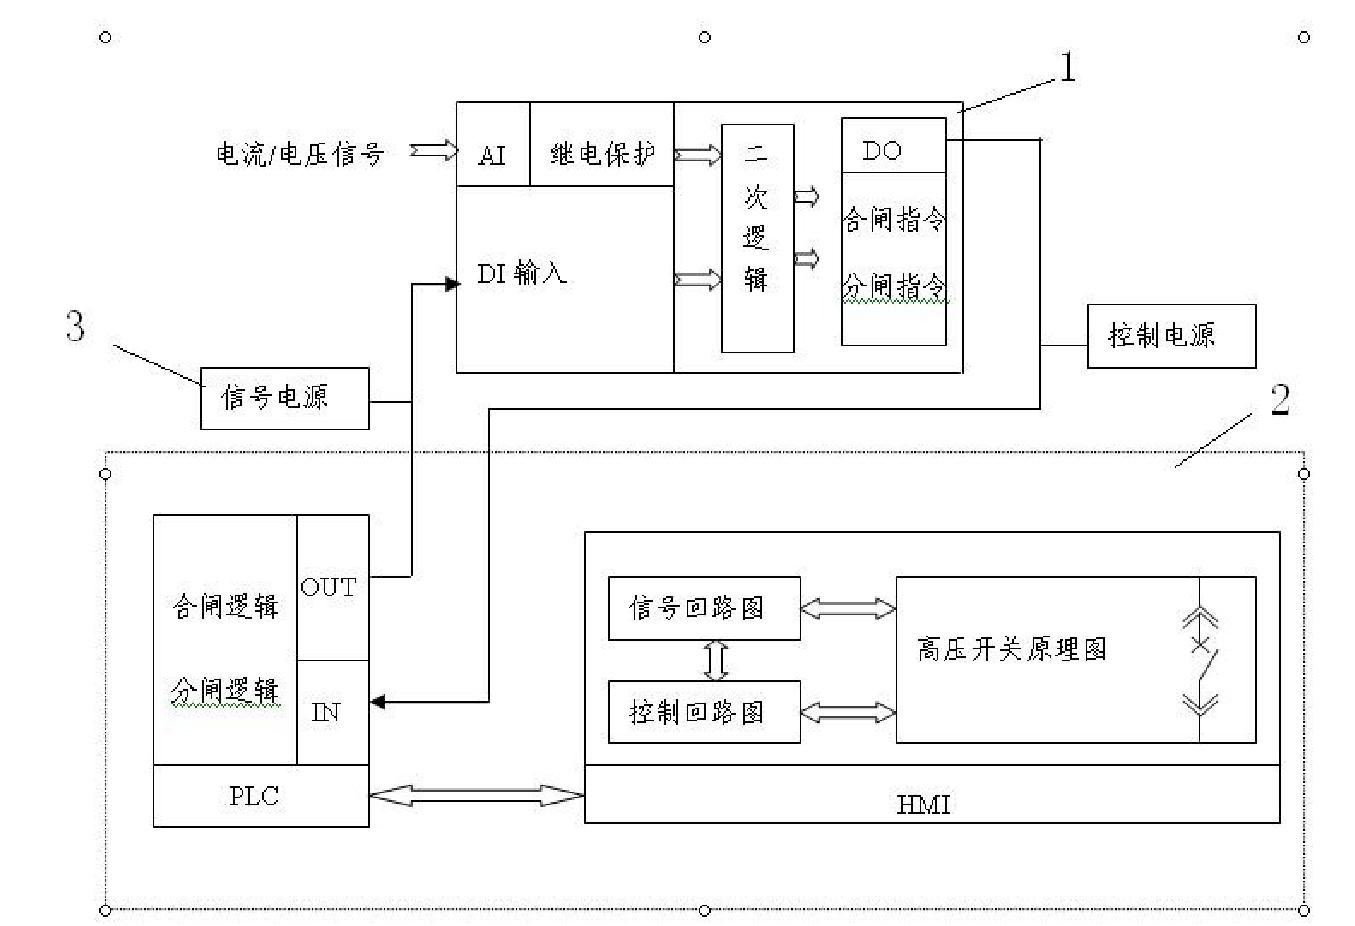 Simulation system of microcomputer relay protection logical test signal system